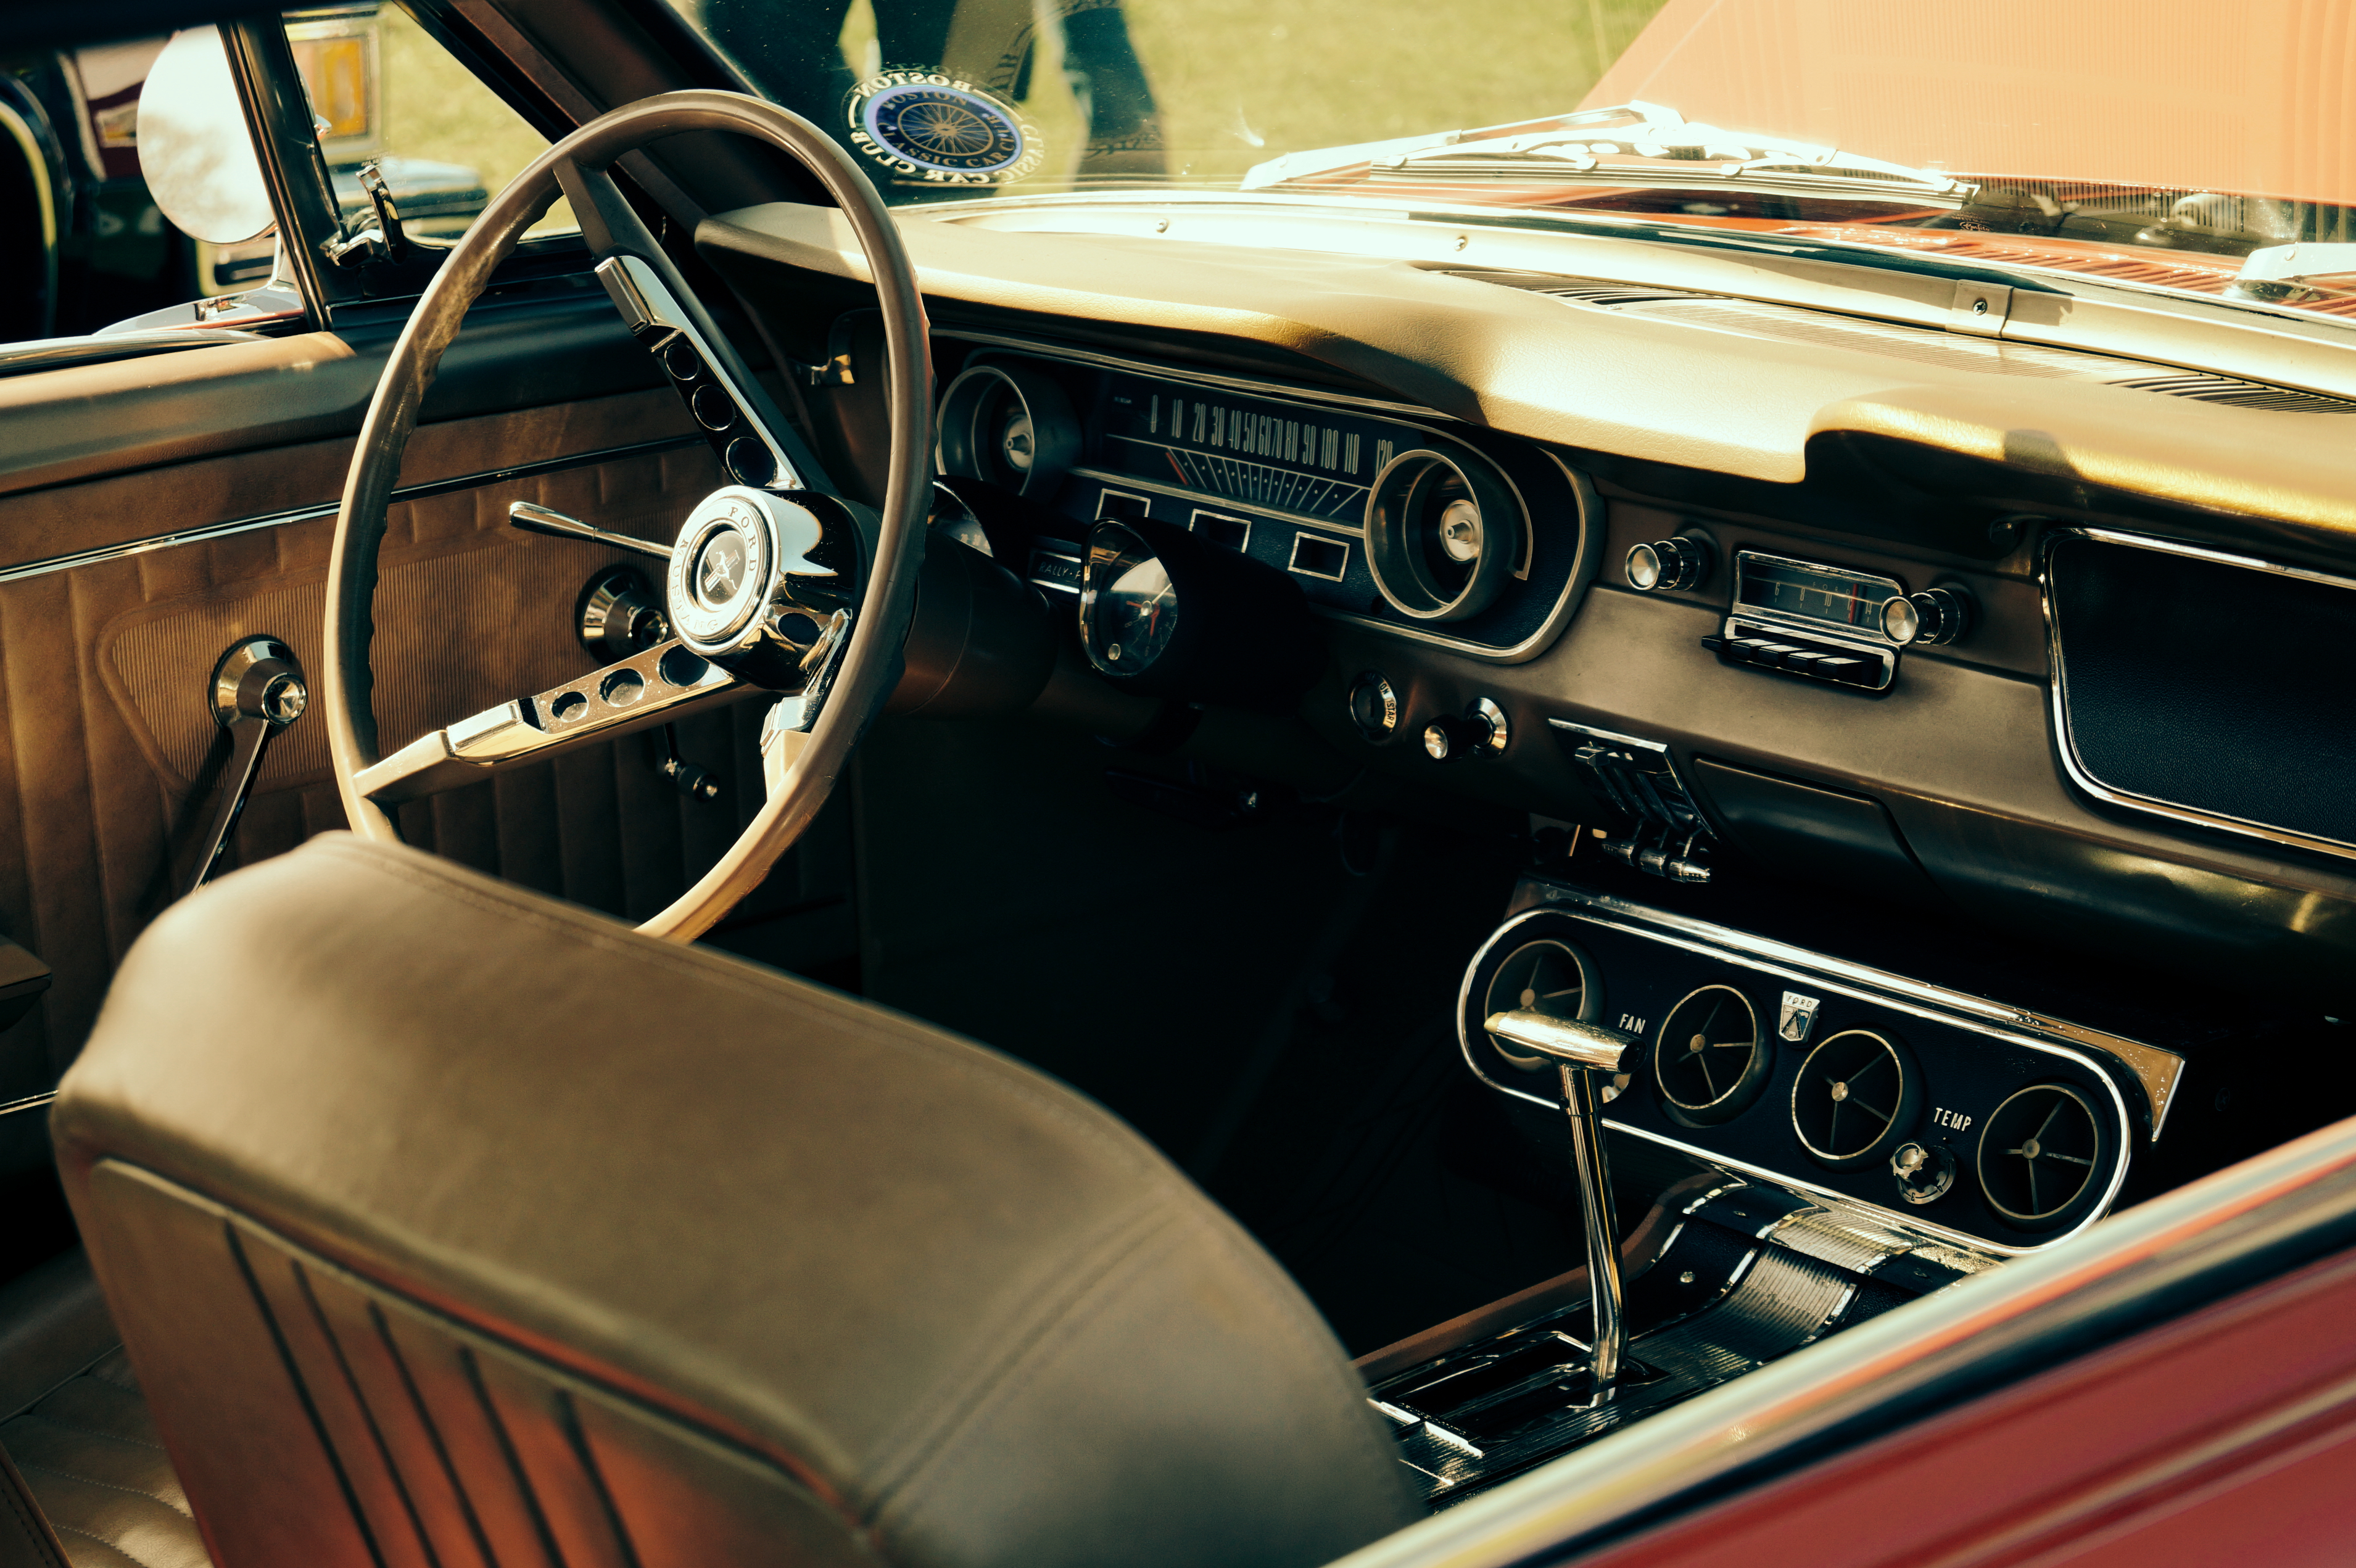 File Ford Mustang Interior Weston Park Transport Show 2015